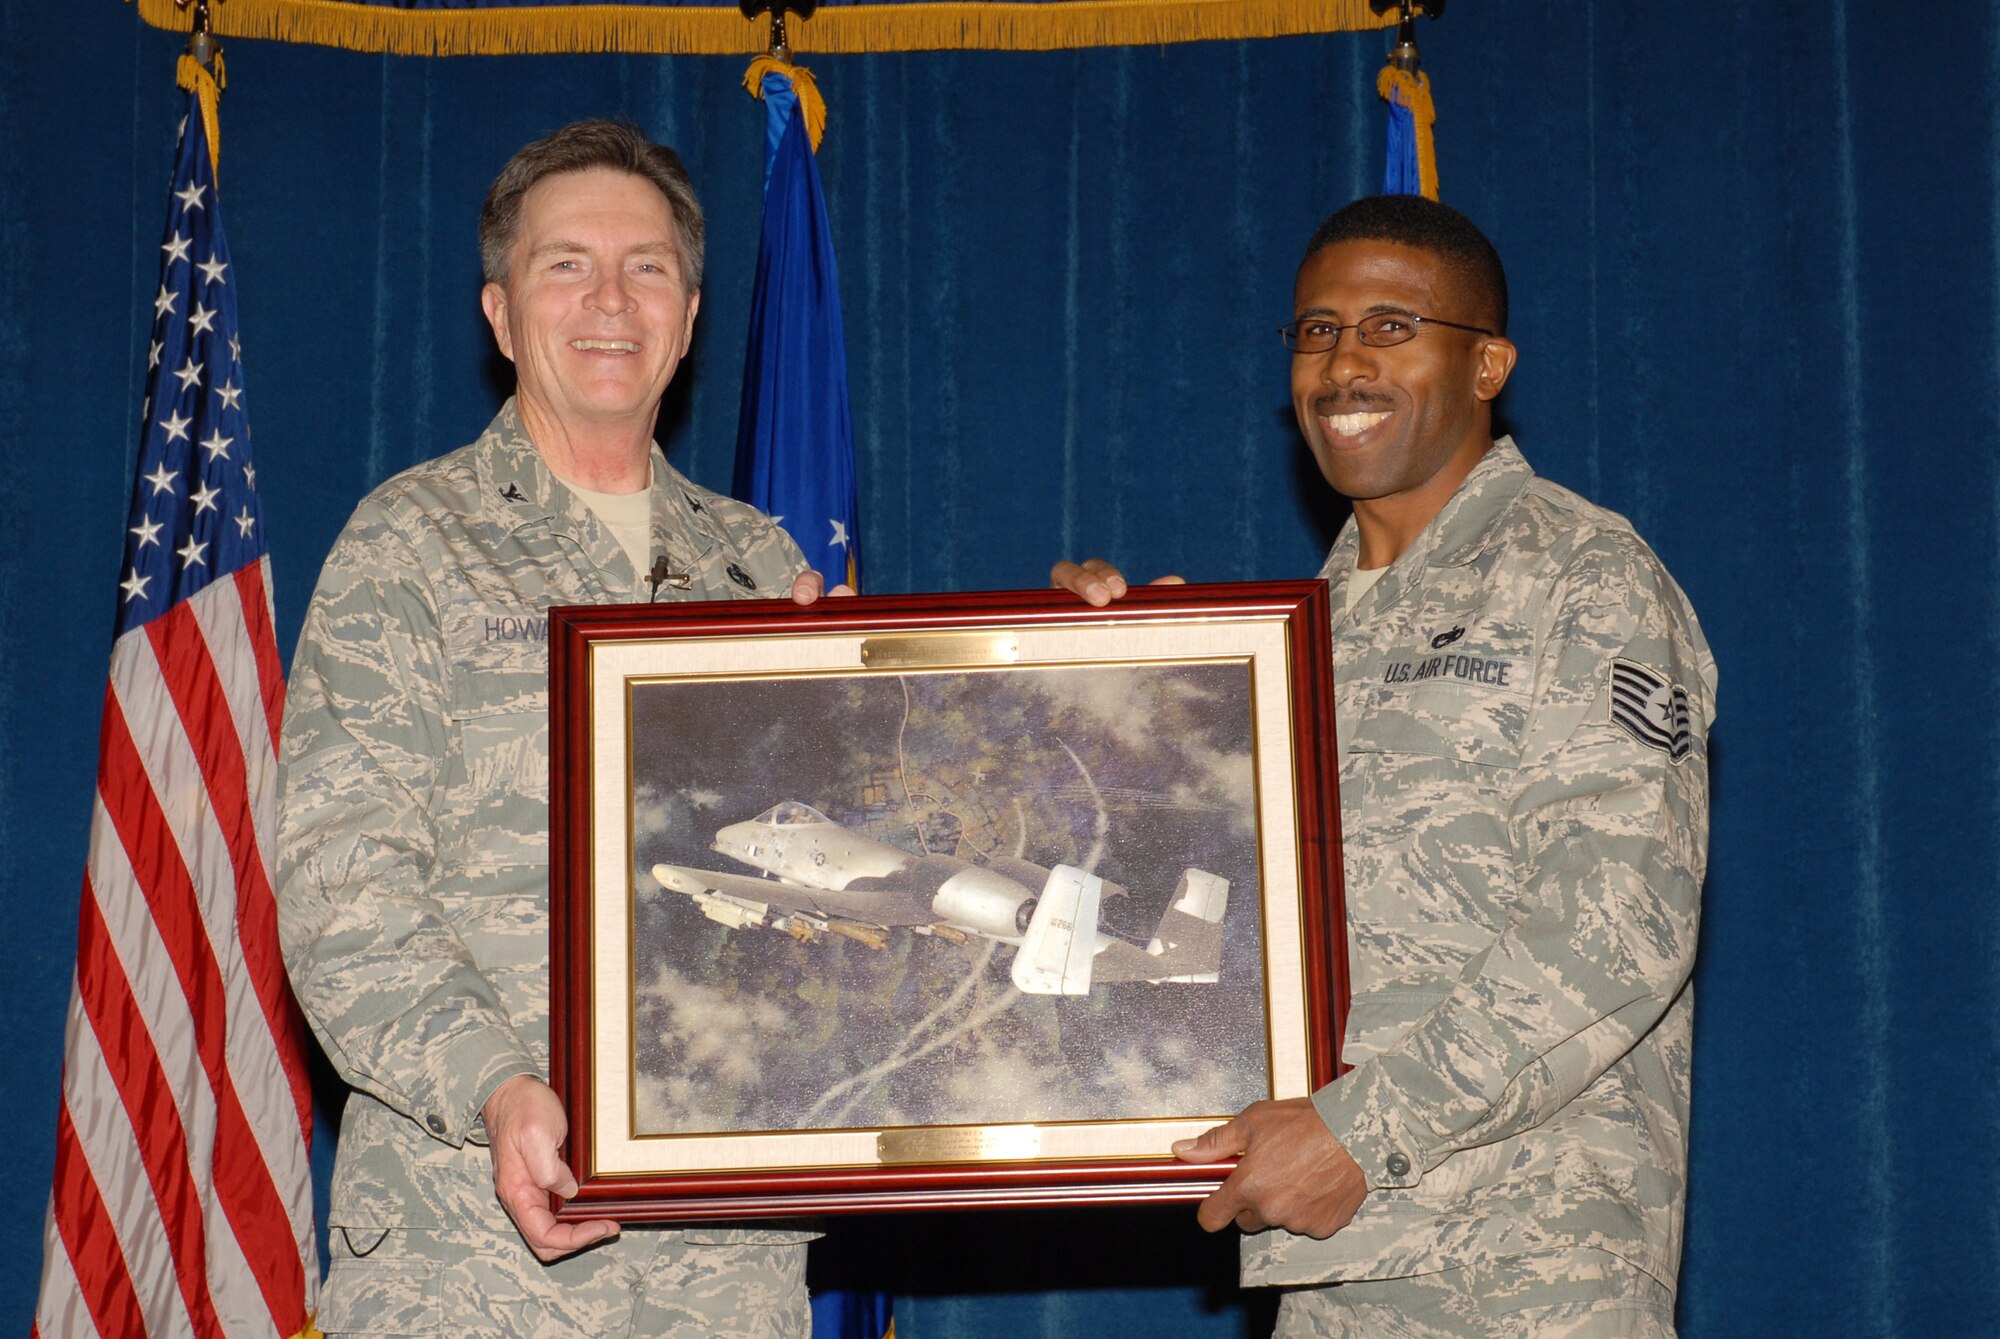 McGHEE TYSON AIR NATIONAL GUARD BASE, Tenn. -- Tech. Sgt. Tyrone E. Melton, right, an enlisted professional military education instructor, receives a heritage painting from Col. Richard B. Howard, commander, upon his departure from assignment at The I.G. Brown Air National Guard Training and Education Center here, Dec. 18, 2009.  (U.S. Air Force photograph by Master Sgt. Mavi Smith/Released)